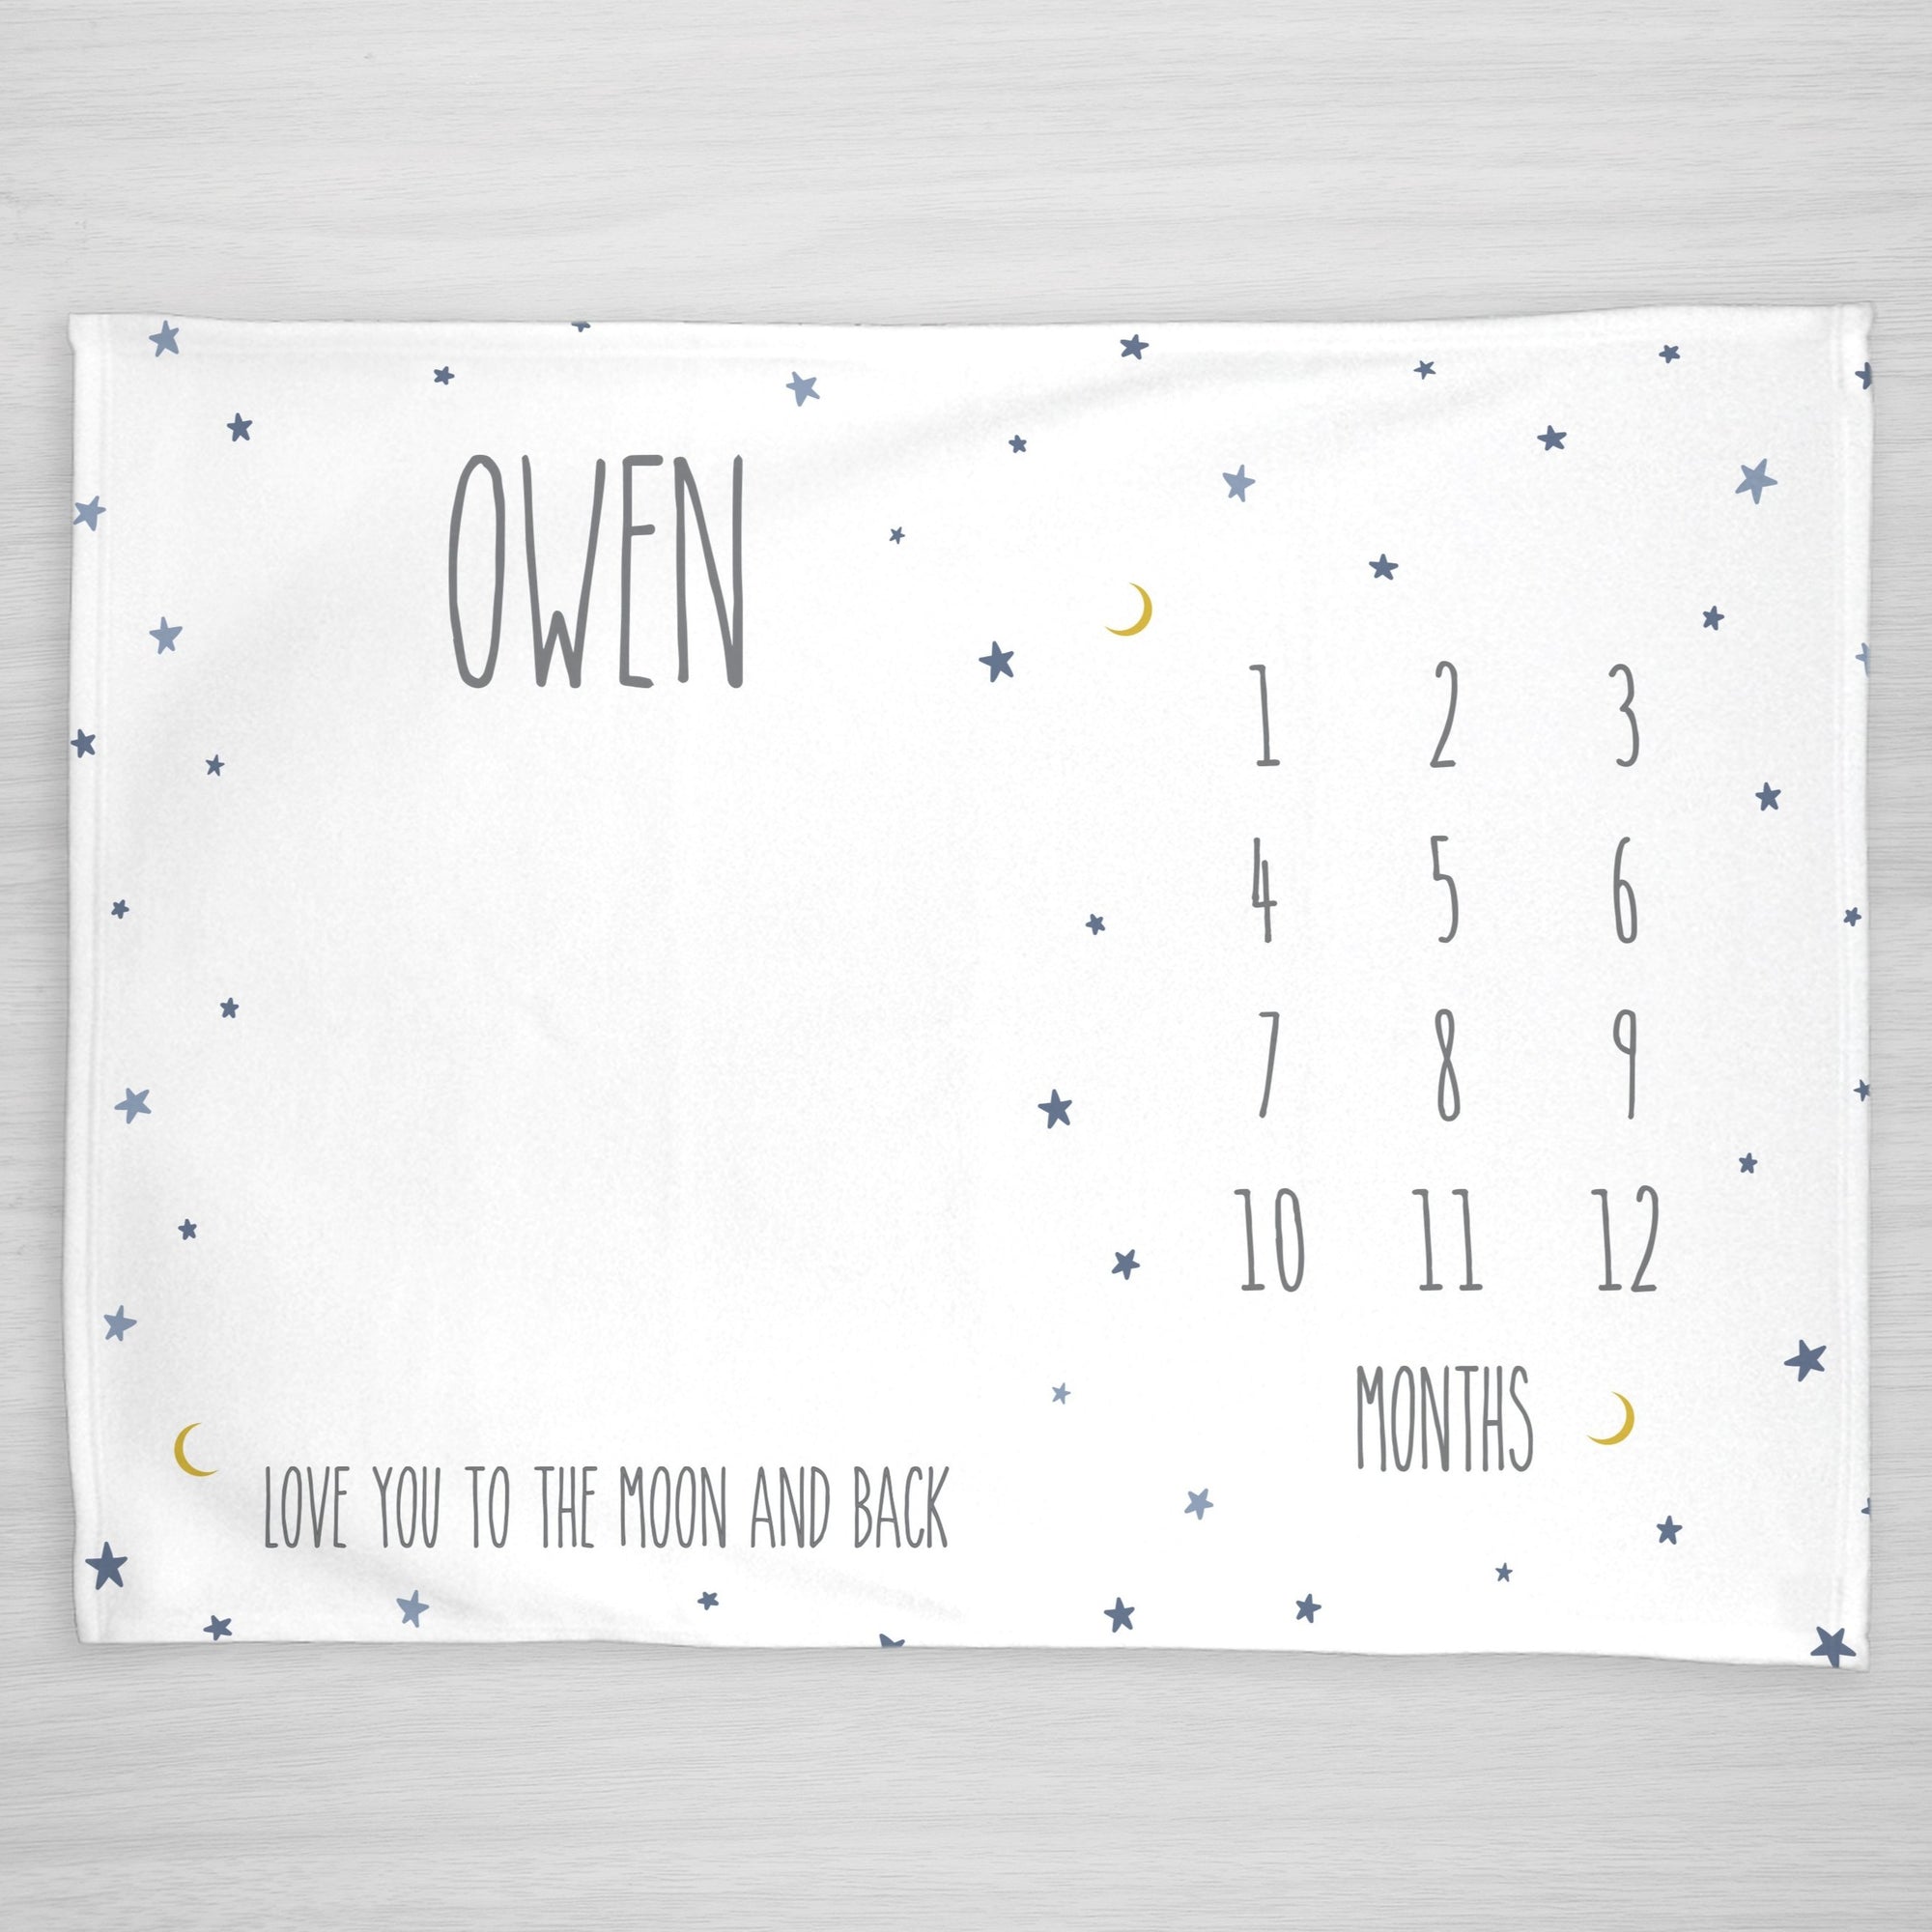 Love you to the Moon and Back Milestone Blanket, Personalized Fleece